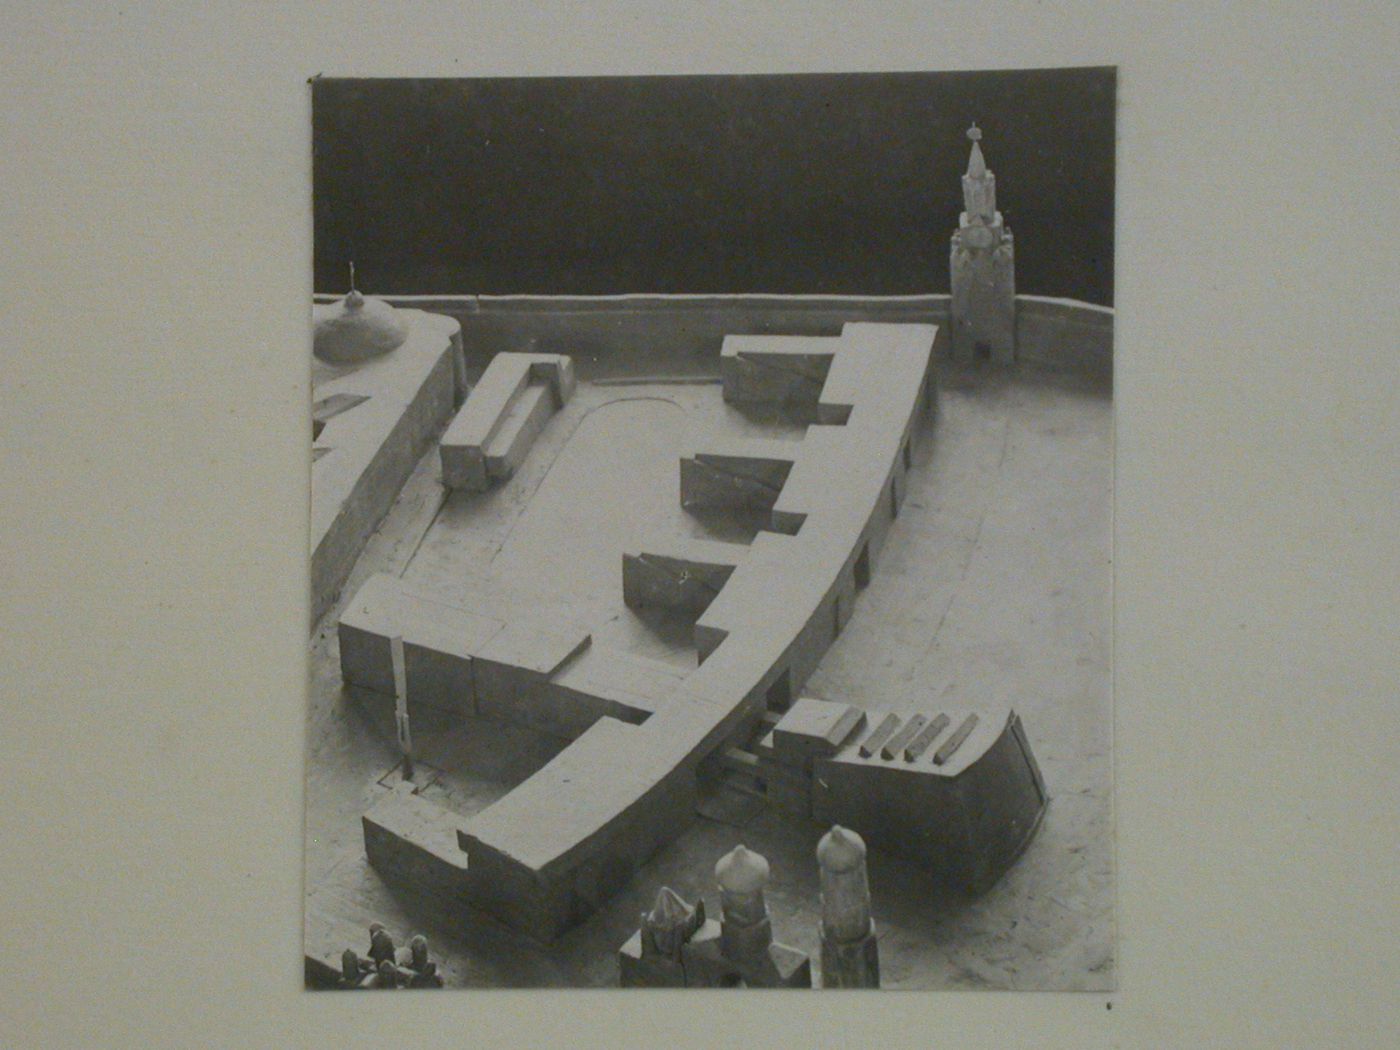 Photograph of a model for a school for All-Union Central Executive Committee (VTsIK) within the Kremlin walls, Moscow